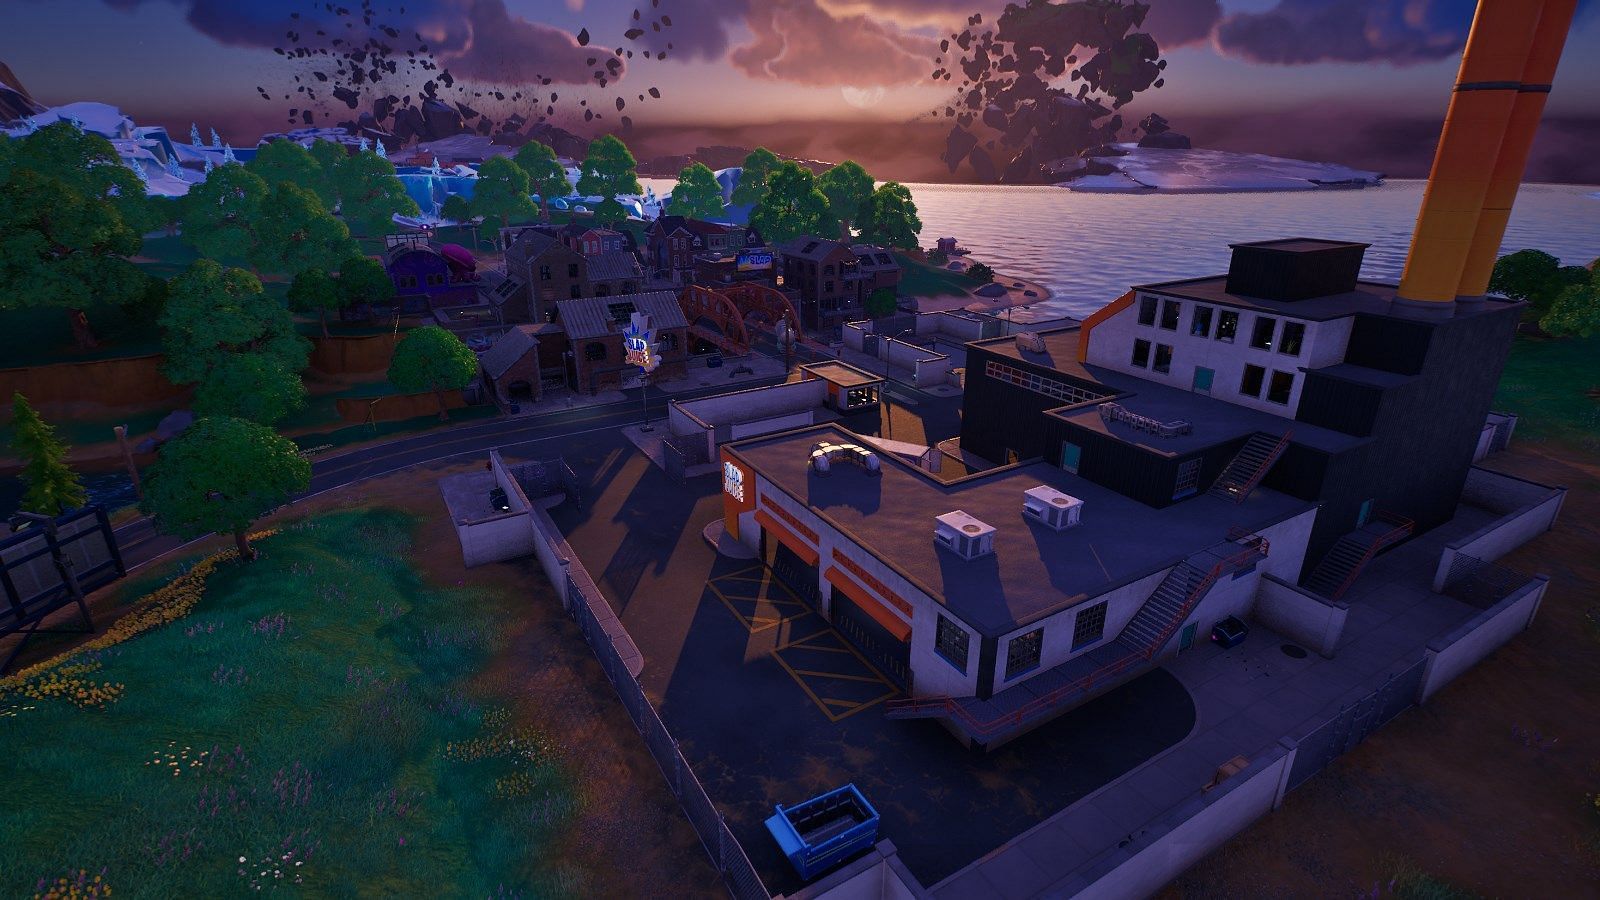 Slappy Shores is very similar to Slurpy Swamp, a popular location from Fortnite Chapter 2 (Image via Epic Games)